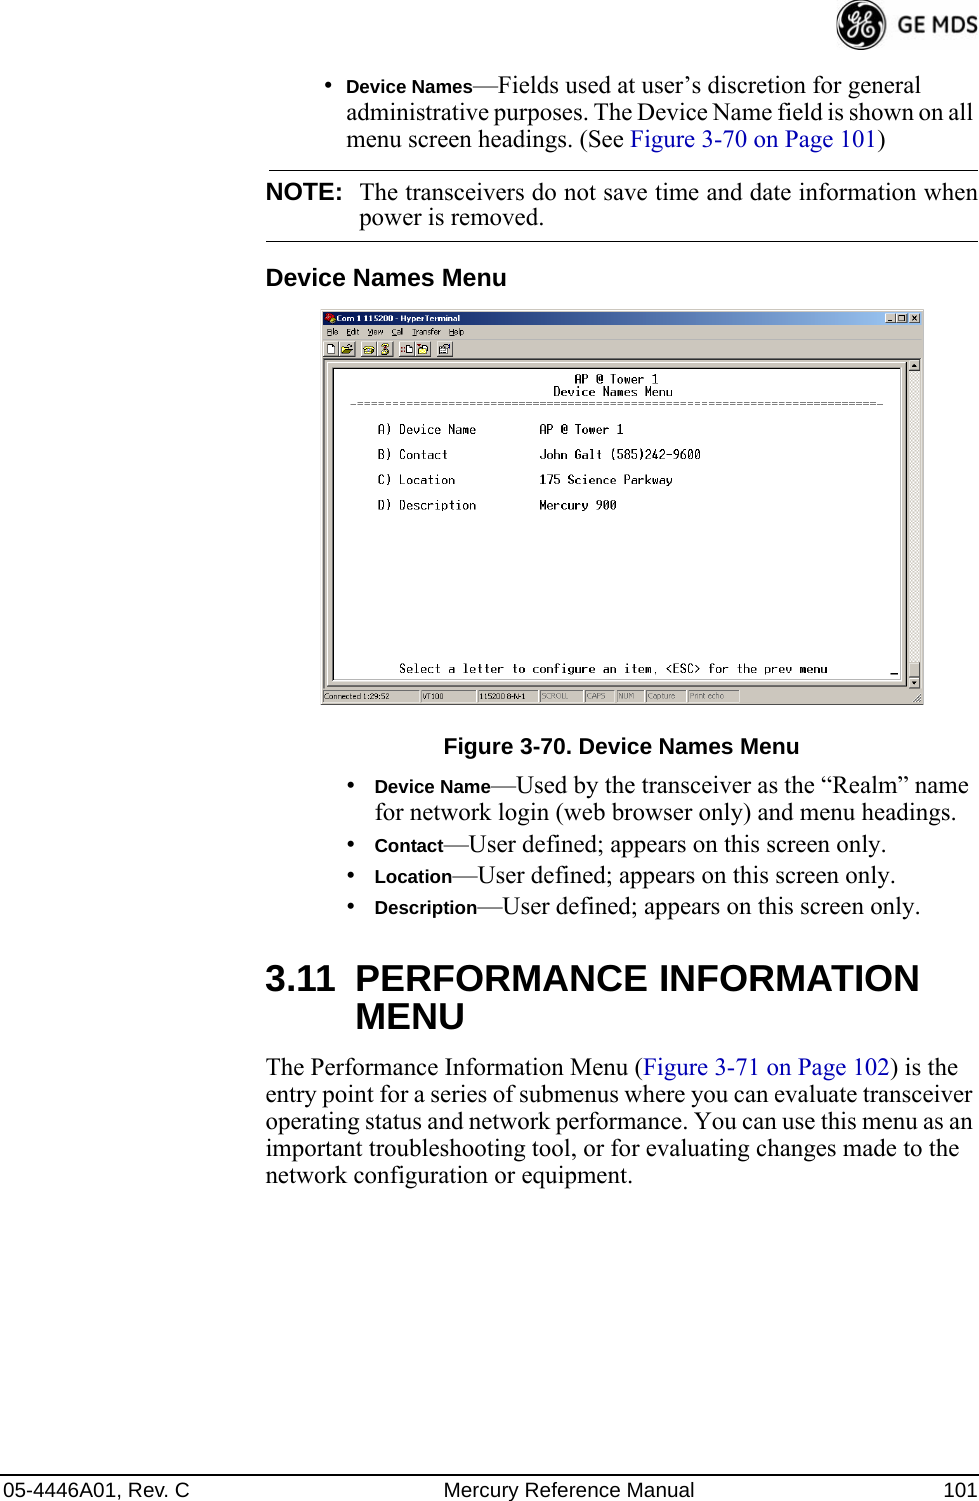 05-4446A01, Rev. C Mercury Reference Manual 101•Device Names—Fields used at user’s discretion for general administrative purposes. The Device Name field is shown on all menu screen headings. (See Figure 3-70 on Page 101)NOTE: The transceivers do not save time and date information whenpower is removed.Device Names MenuFigure 3-70. Device Names Menu•Device Name—Used by the transceiver as the “Realm” name for network login (web browser only) and menu headings. •Contact—User defined; appears on this screen only.•Location—User defined; appears on this screen only.•Description—User defined; appears on this screen only.3.11 PERFORMANCE INFORMATION MENUThe Performance Information Menu (Figure 3-71 on Page 102) is the entry point for a series of submenus where you can evaluate transceiver operating status and network performance. You can use this menu as an important troubleshooting tool, or for evaluating changes made to the network configuration or equipment. 